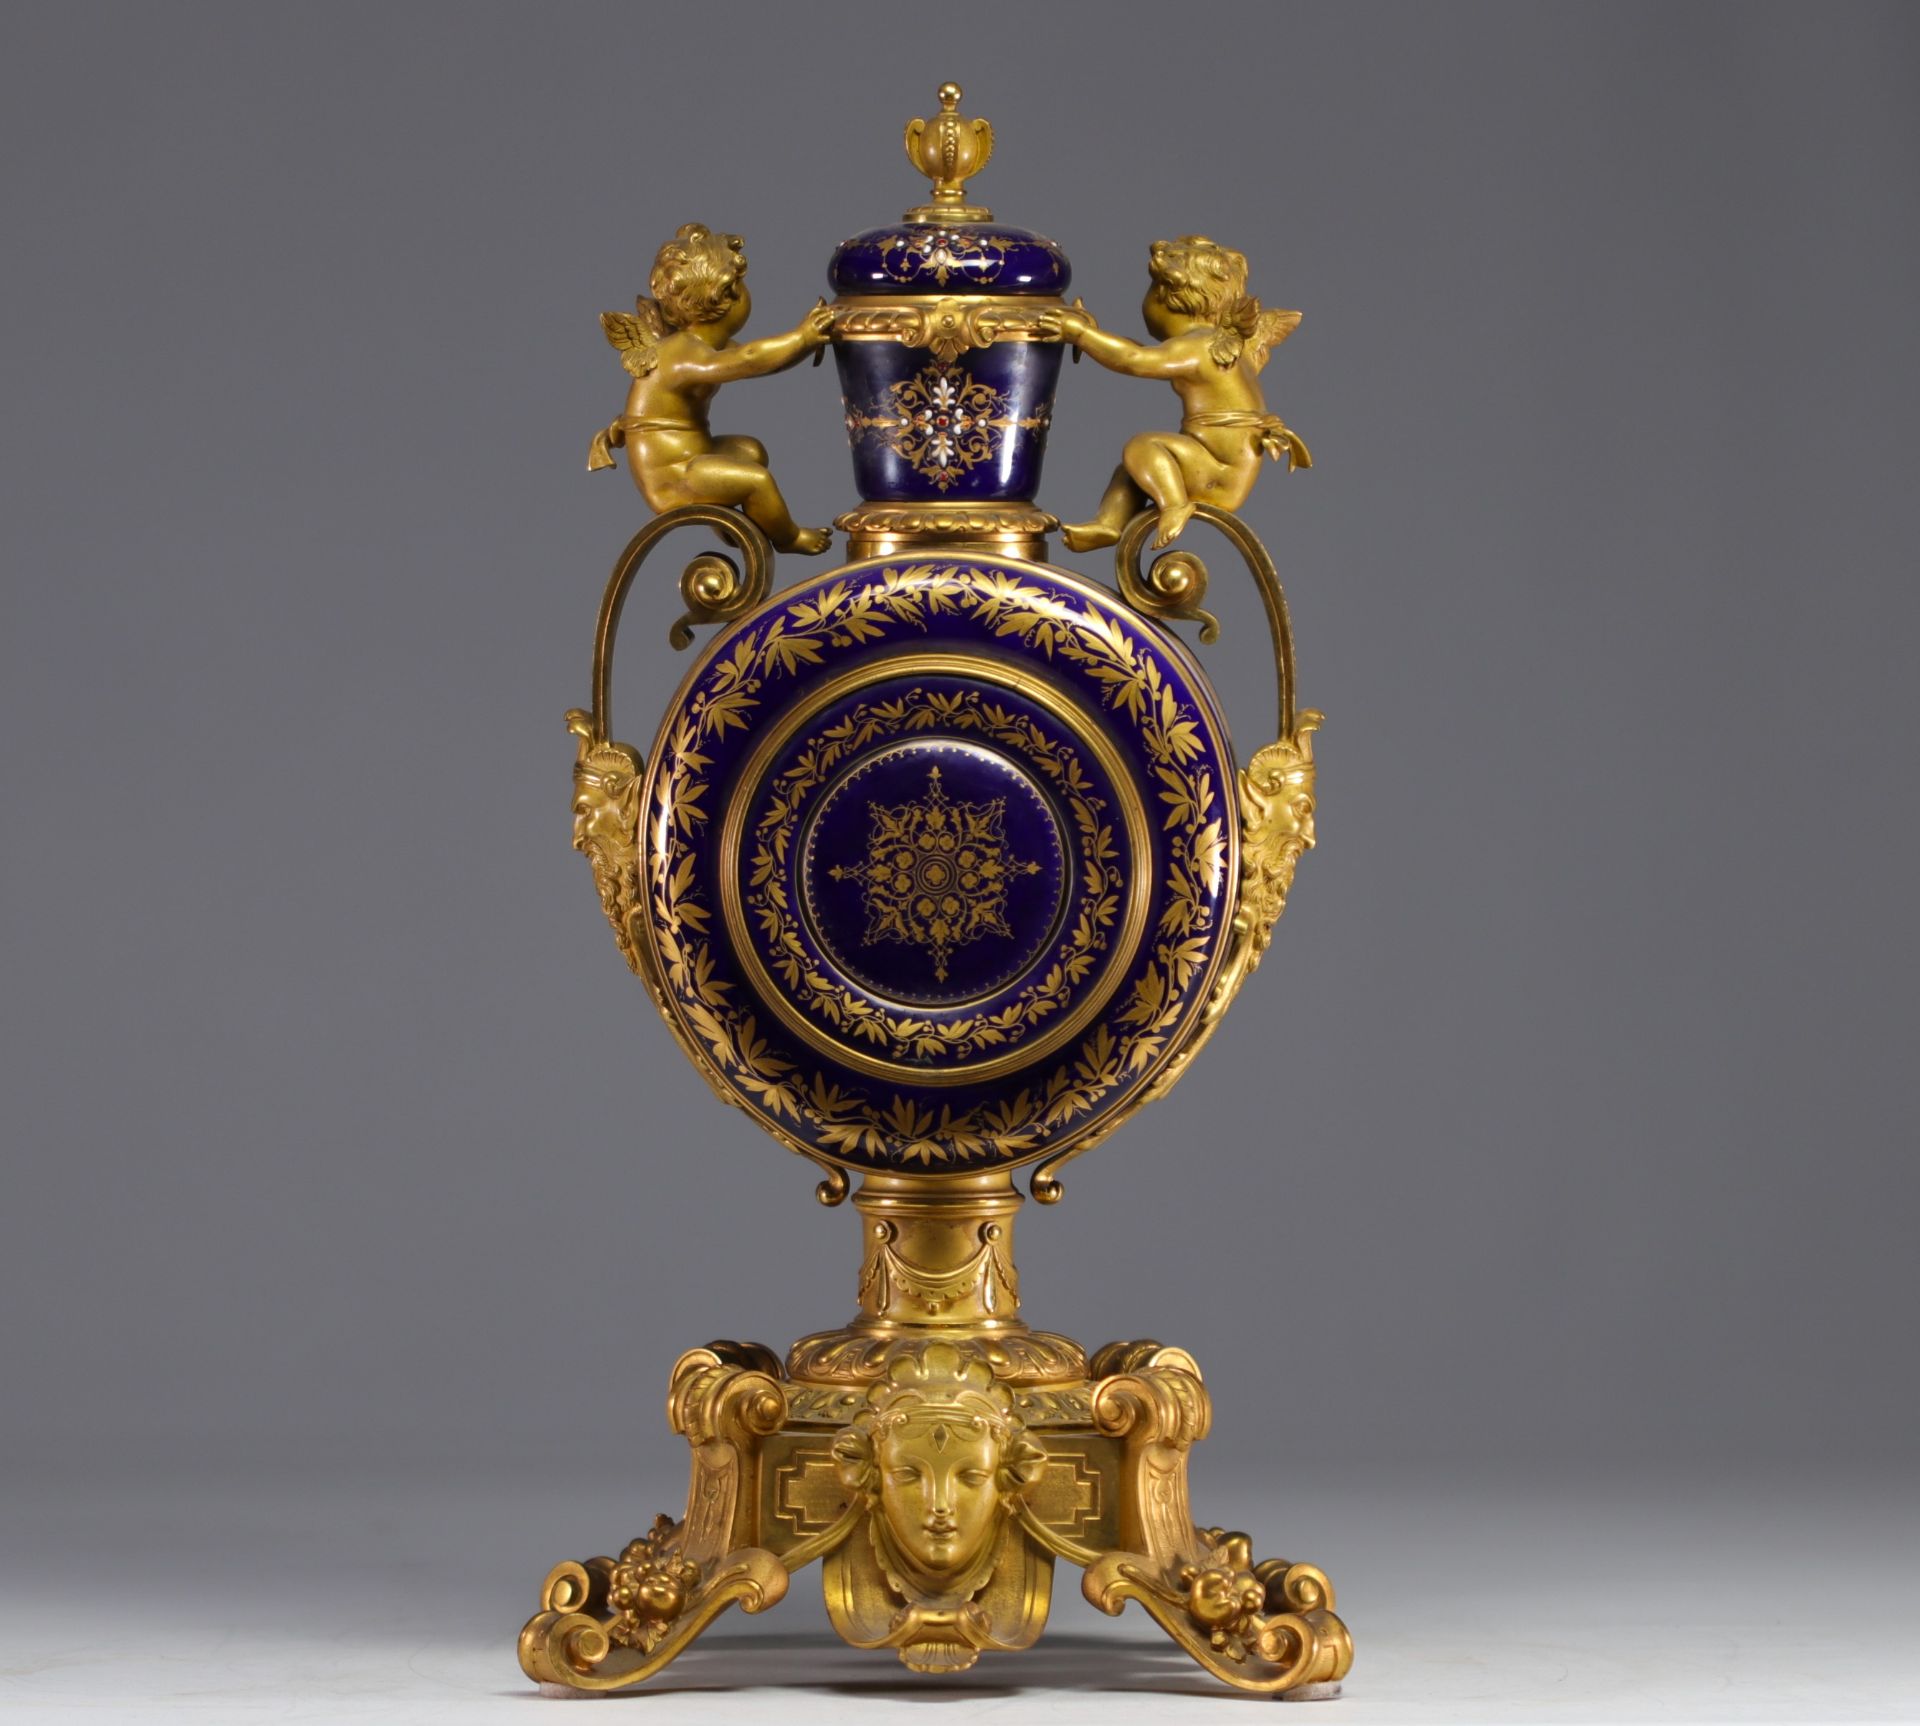 A rare Sevres porcelain and gilt bronze clock decorated with cherubs. - Image 7 of 8